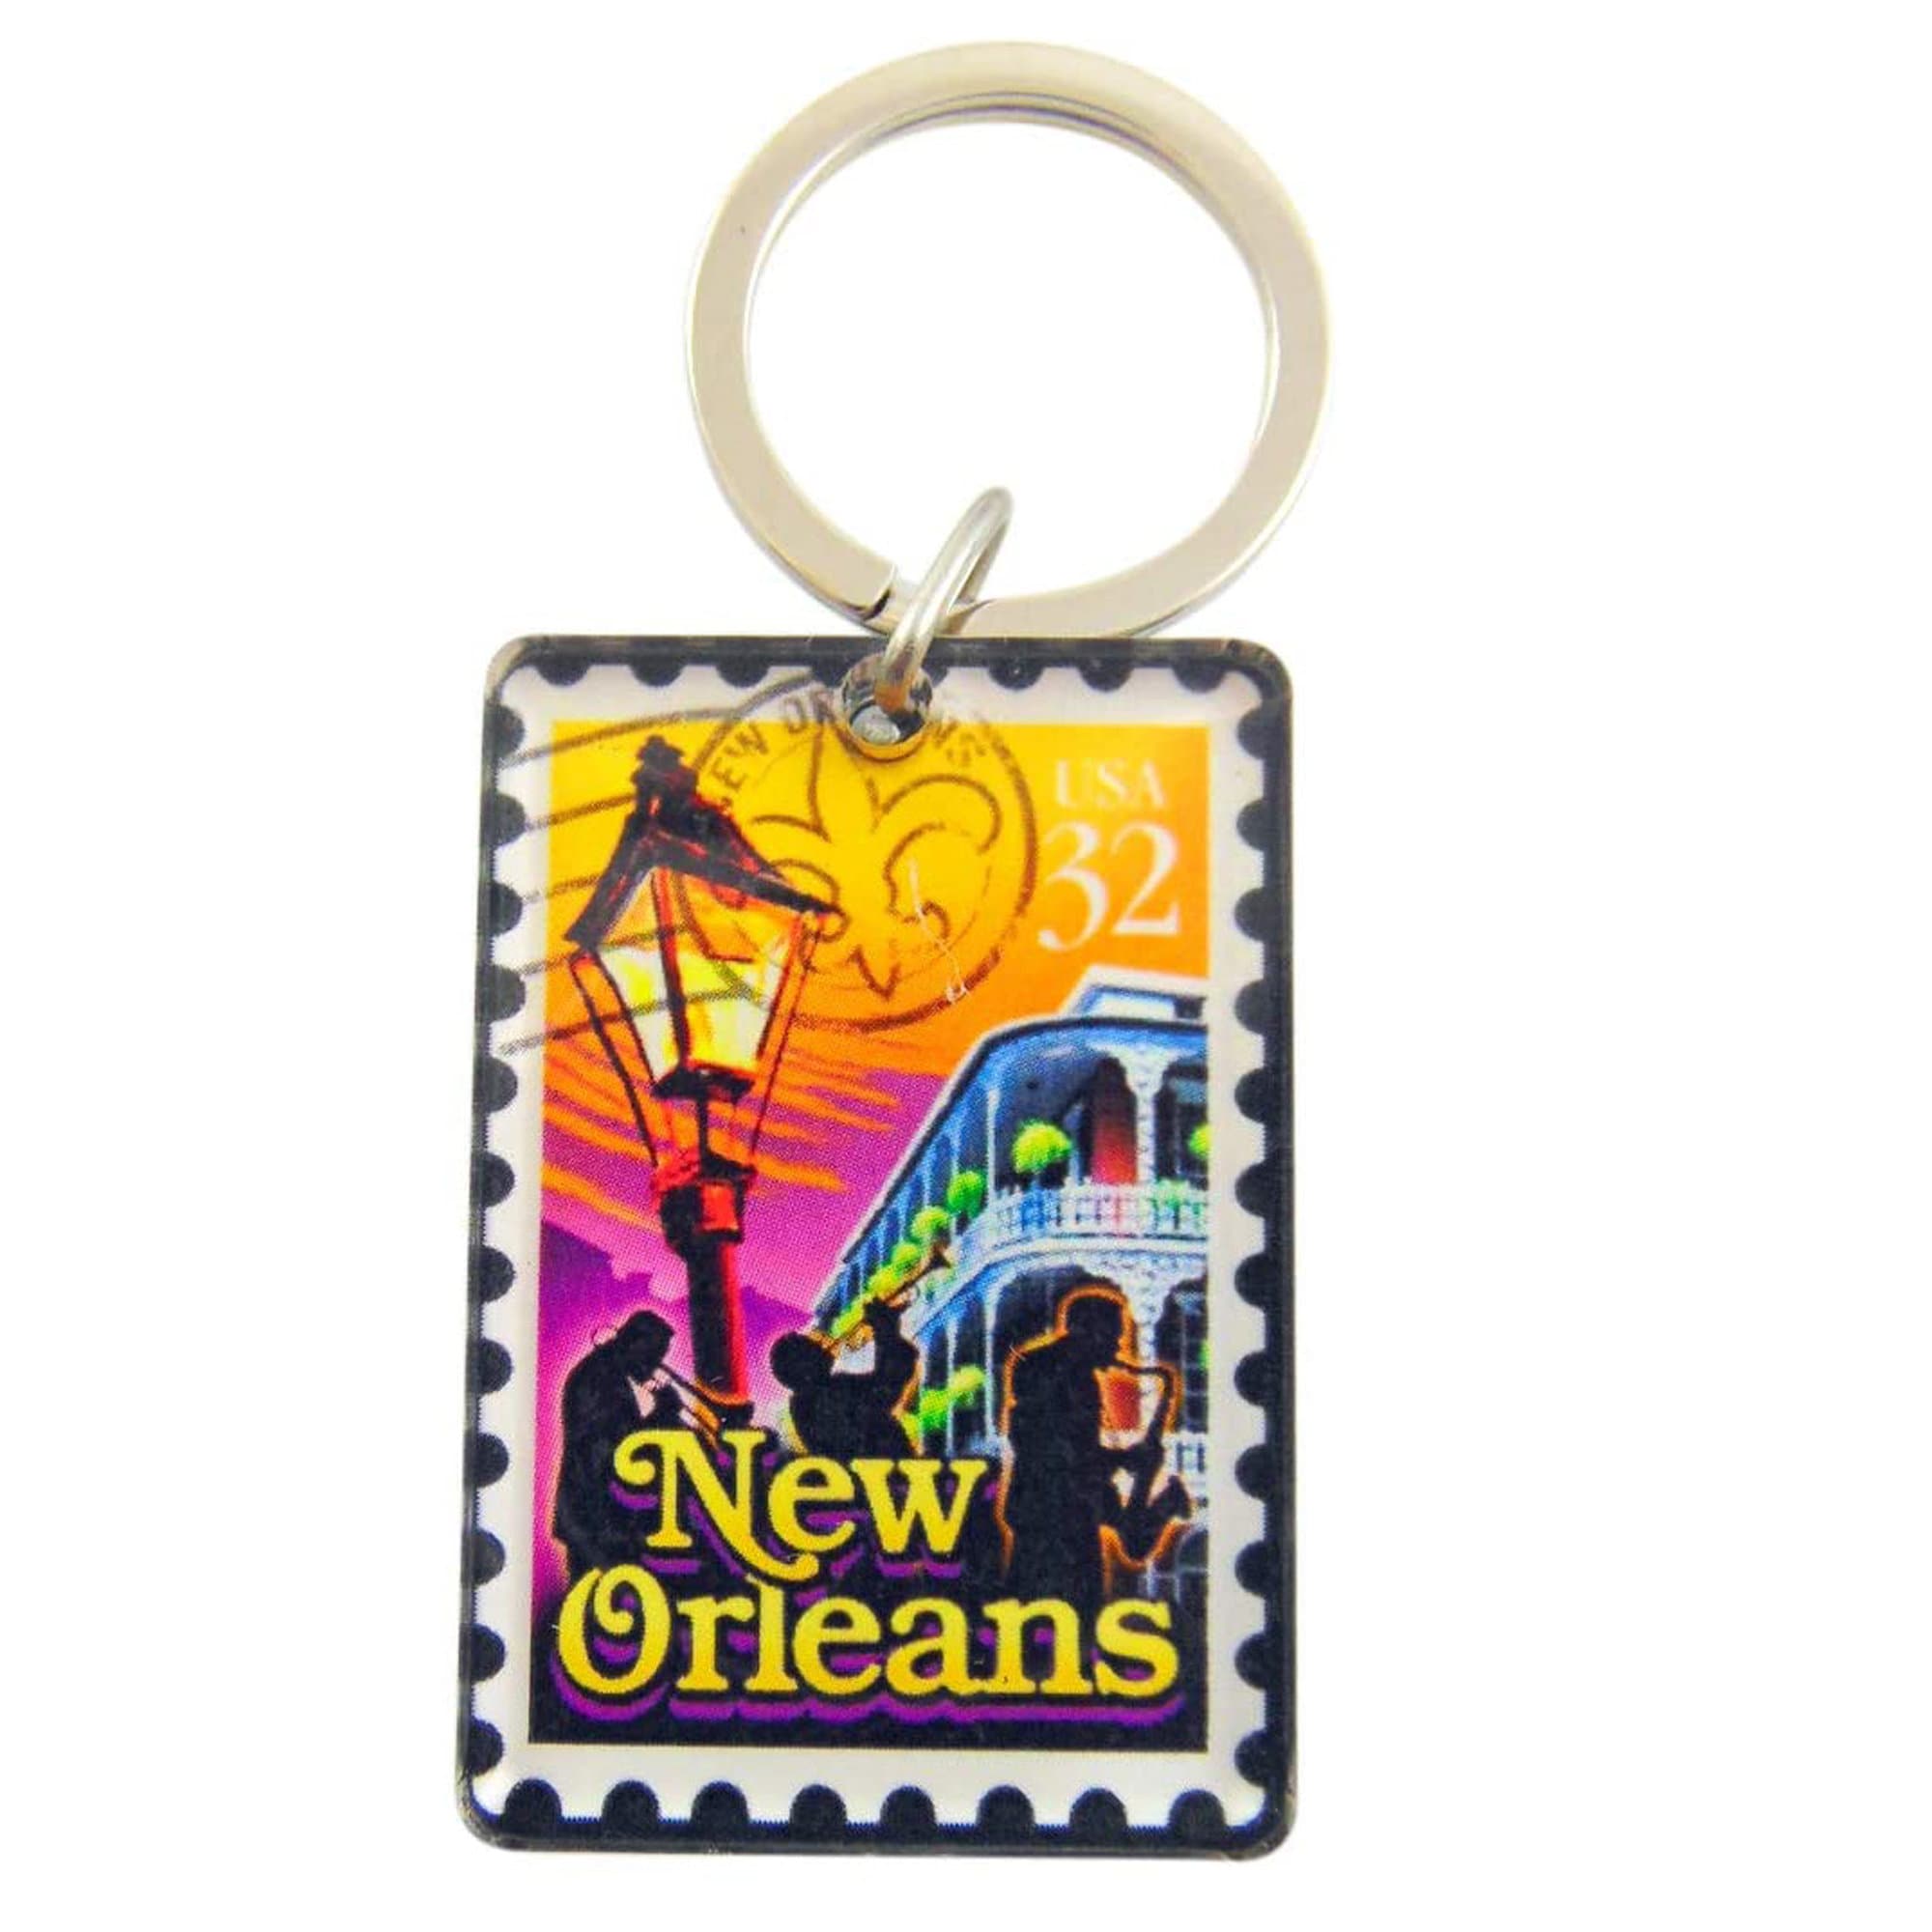 Leather La State Seal Key Ring & Gifts for Him in New Orleans, La